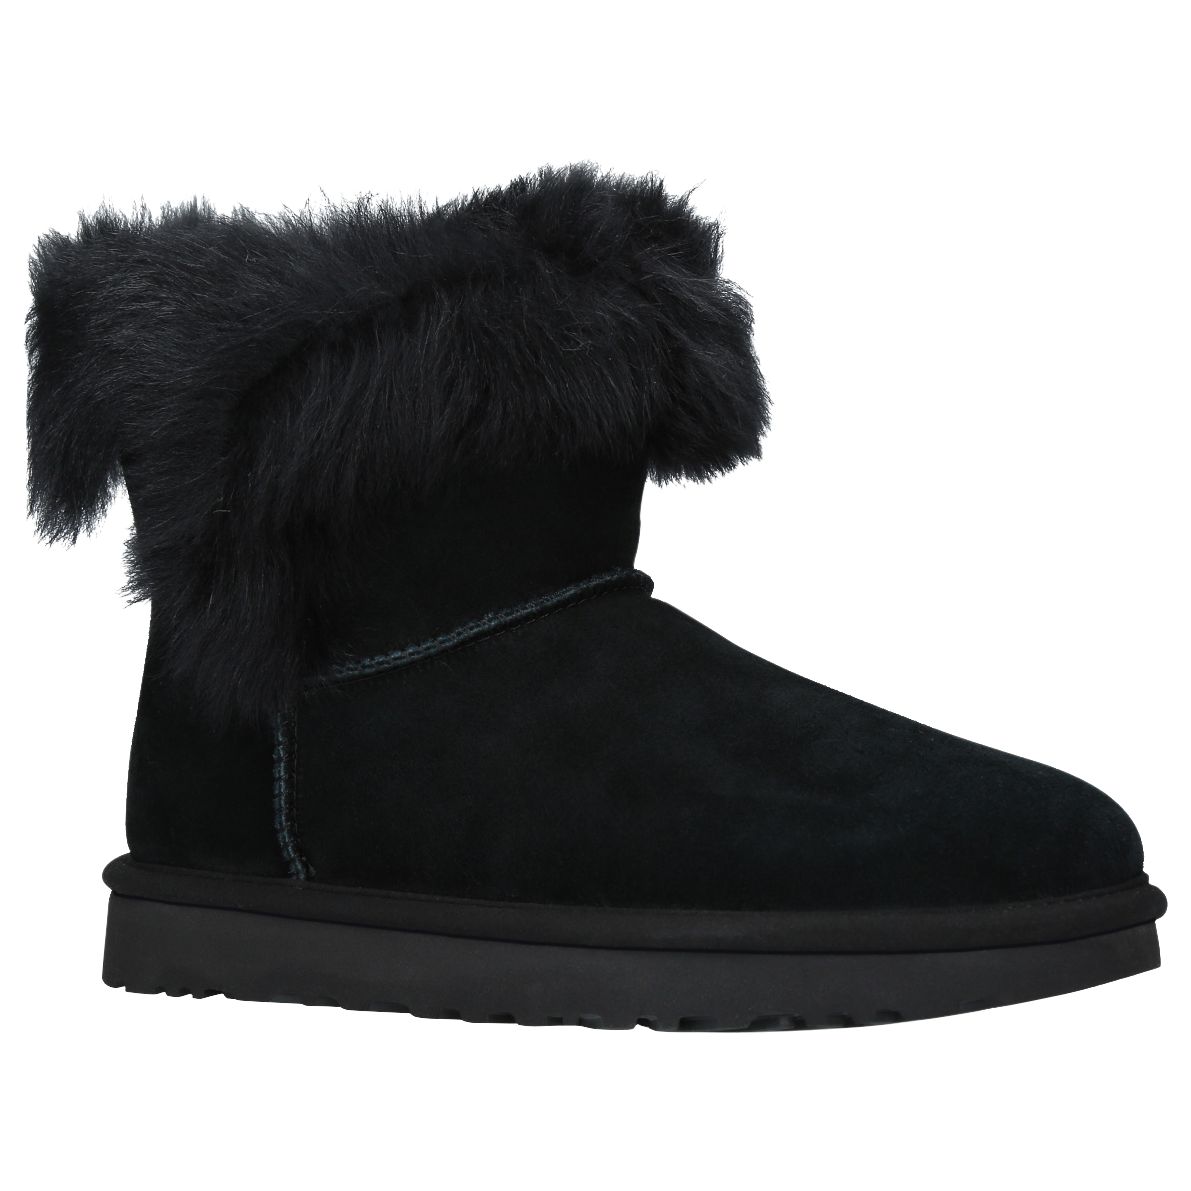 UGG Milla Classic Ankle Boots, Black, 4